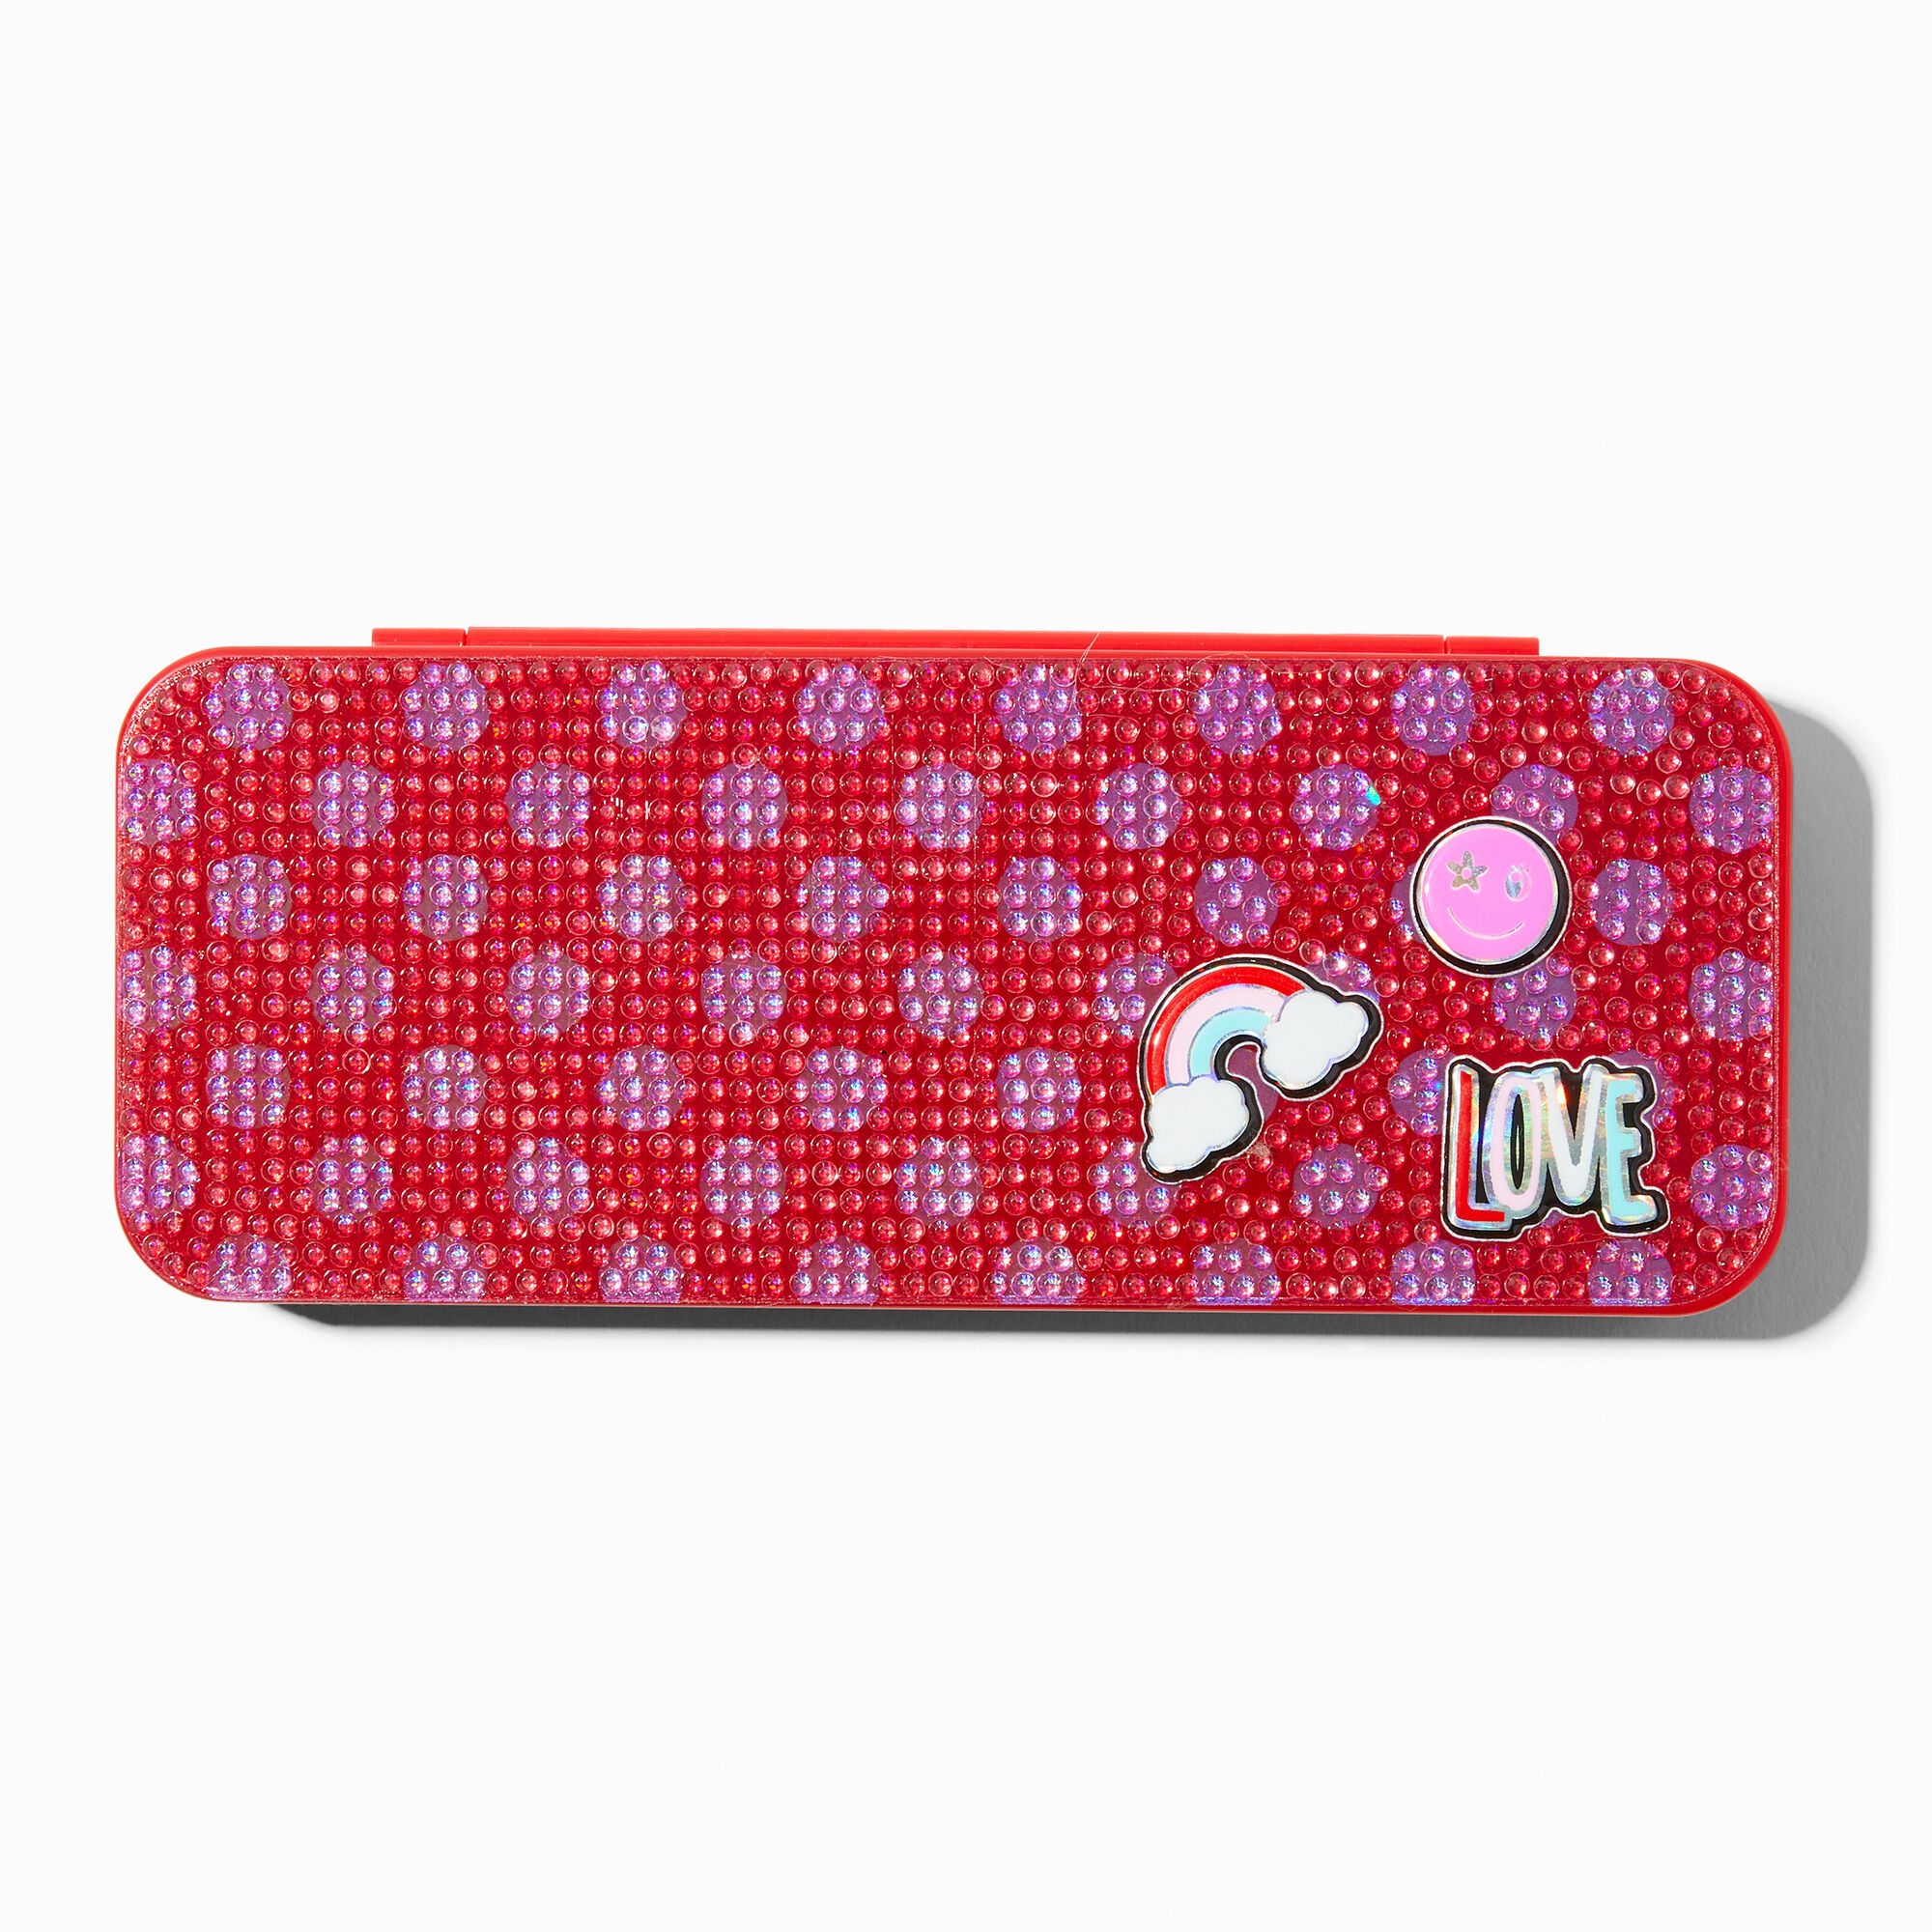 View Claires Pink Polka Dots Bling Makeup Palette Red information